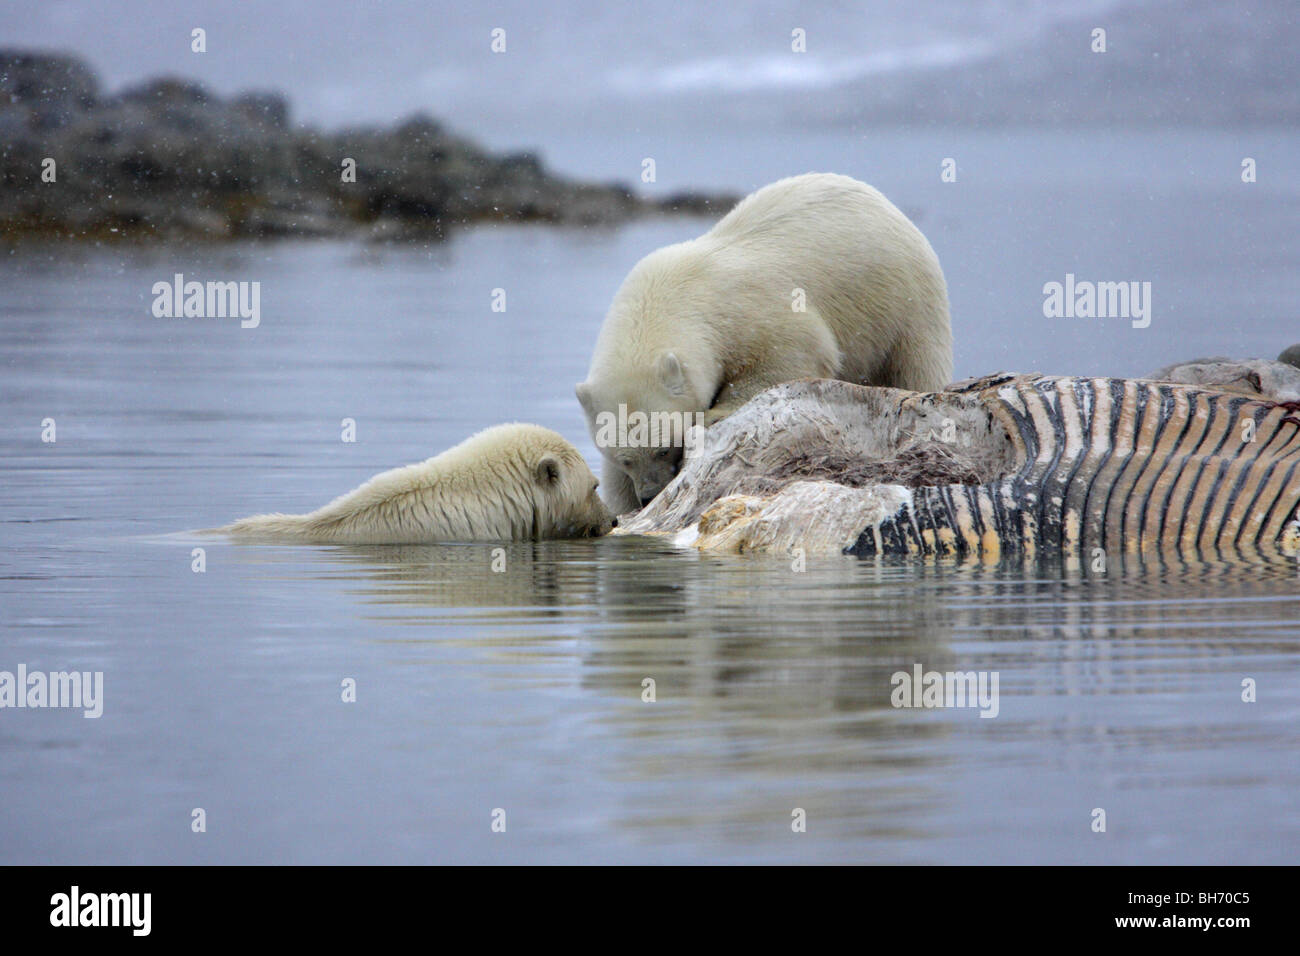 Two Polar Bear Ursus maritimus feeding on a fin whale carcass floating in the ocean with a reflection in the water Stock Photo